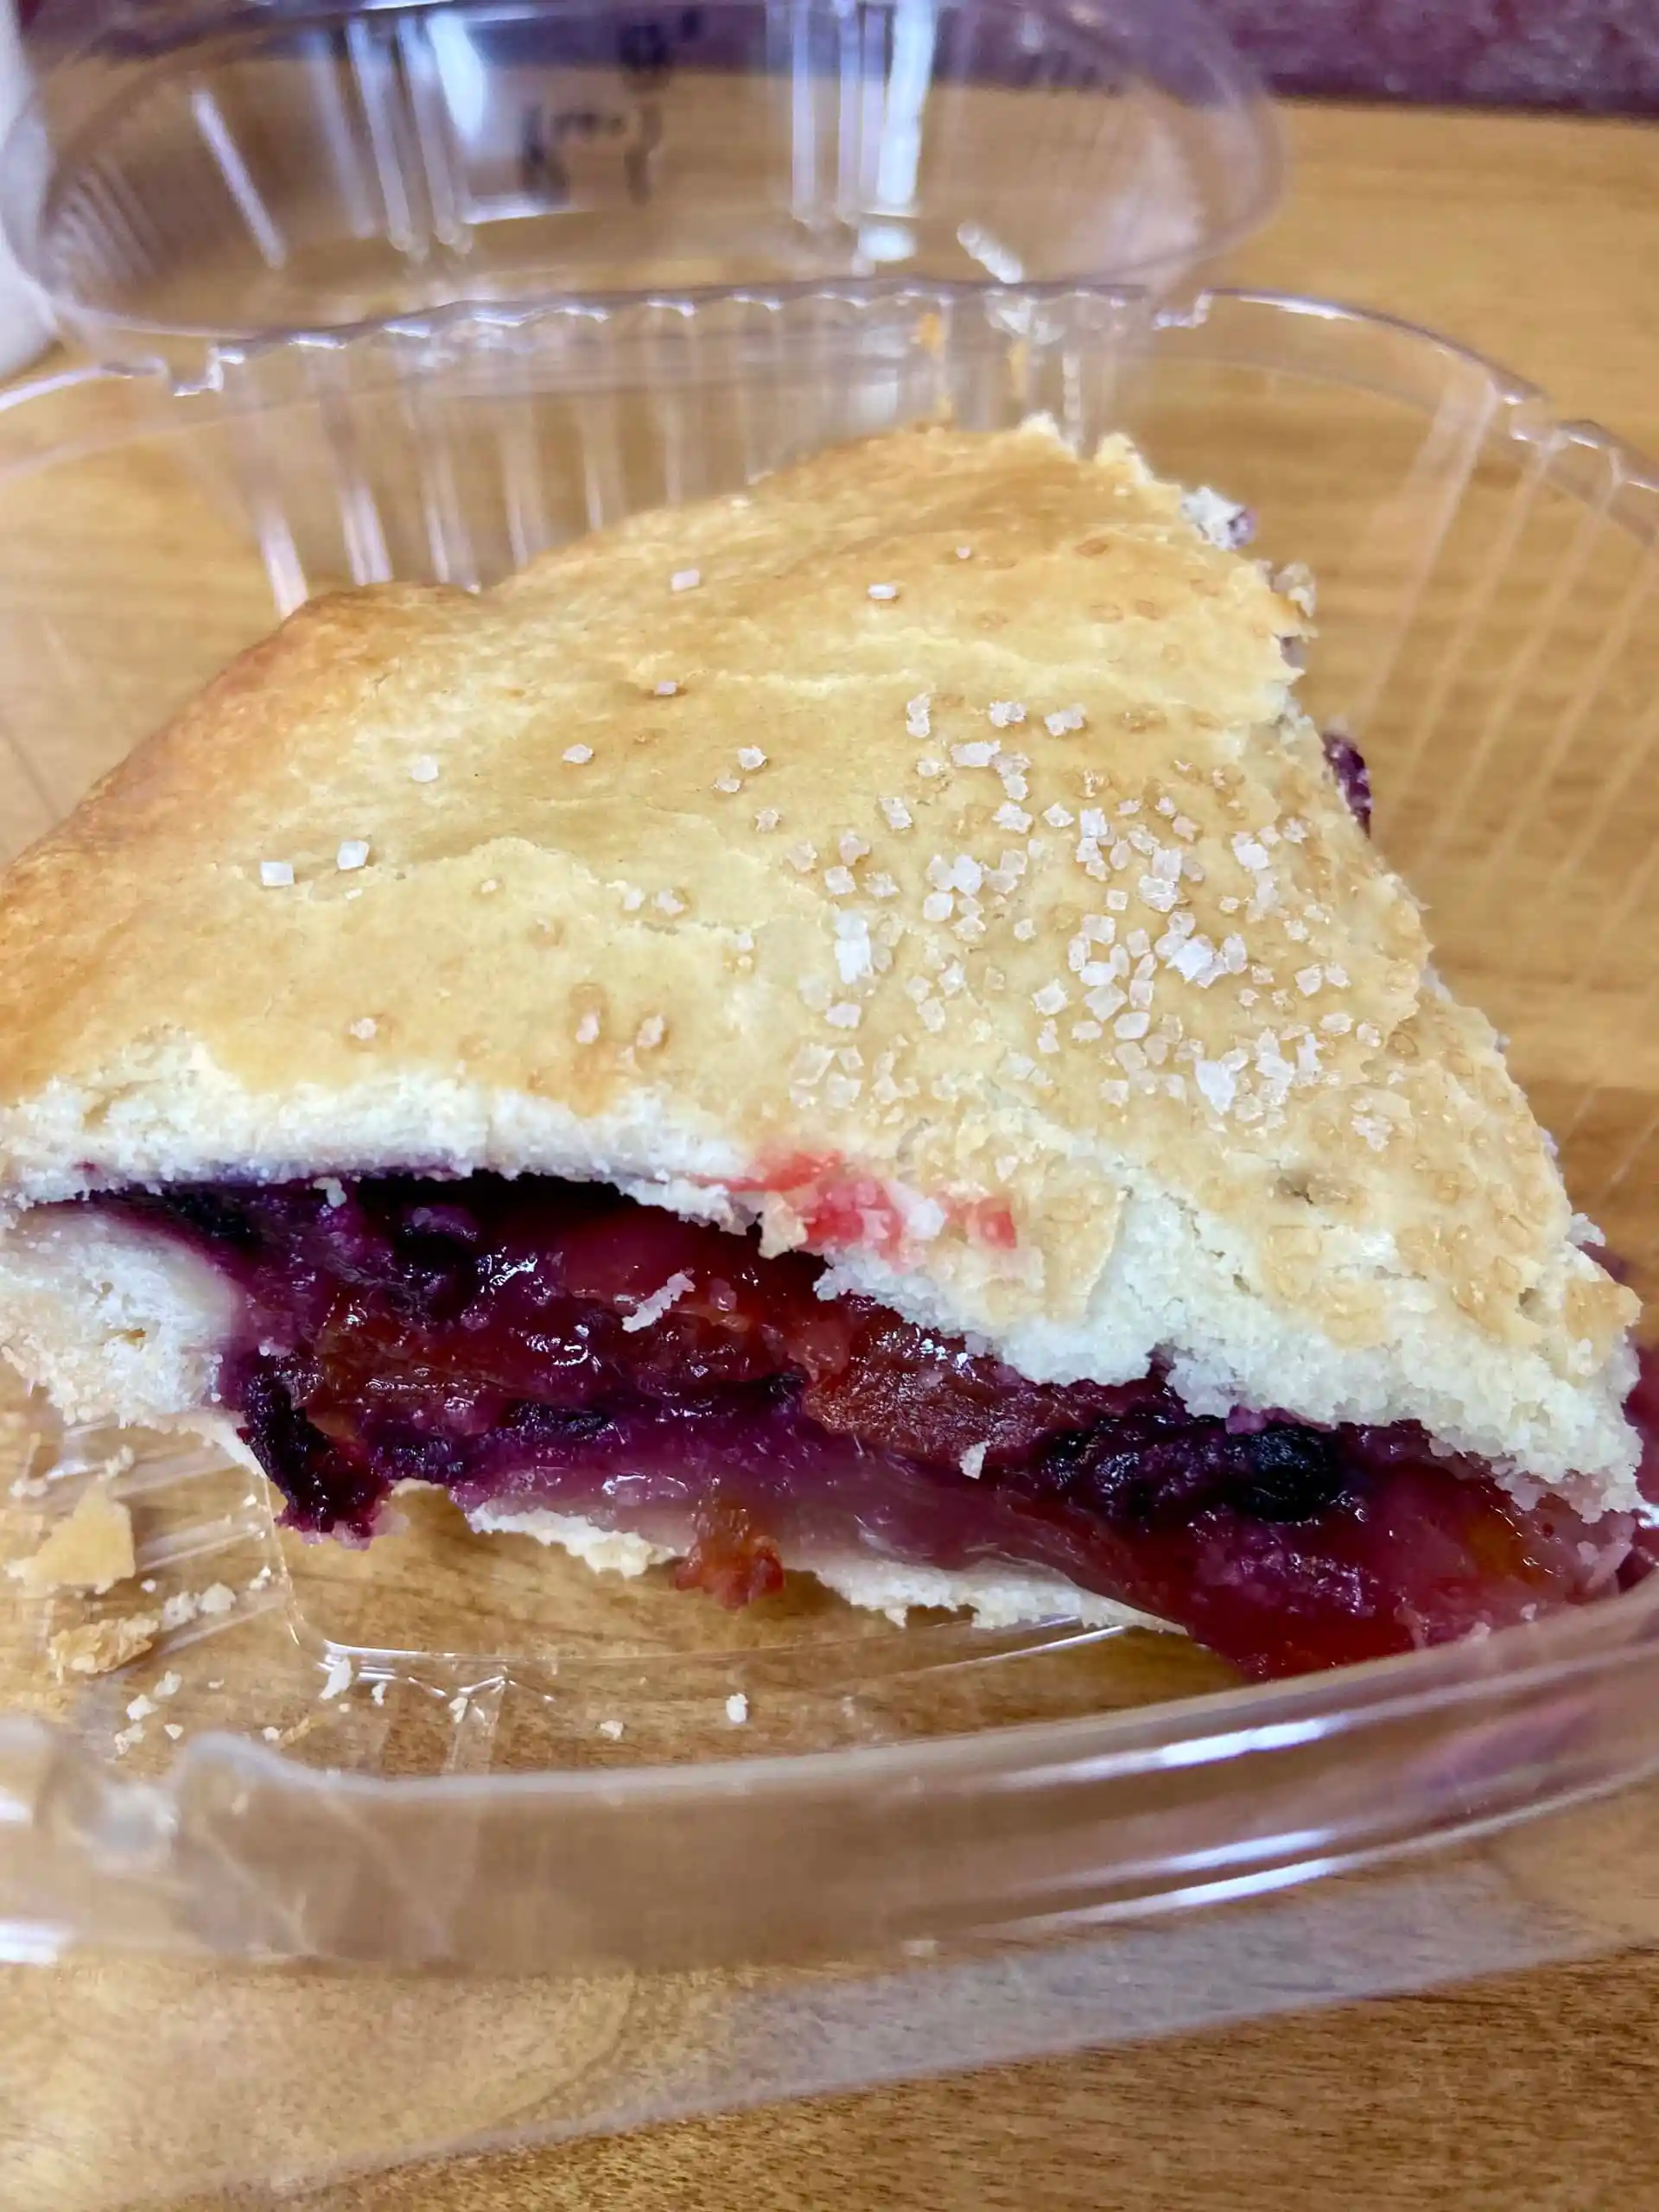 A slice of homemade pie courtesy of Veyo Pies